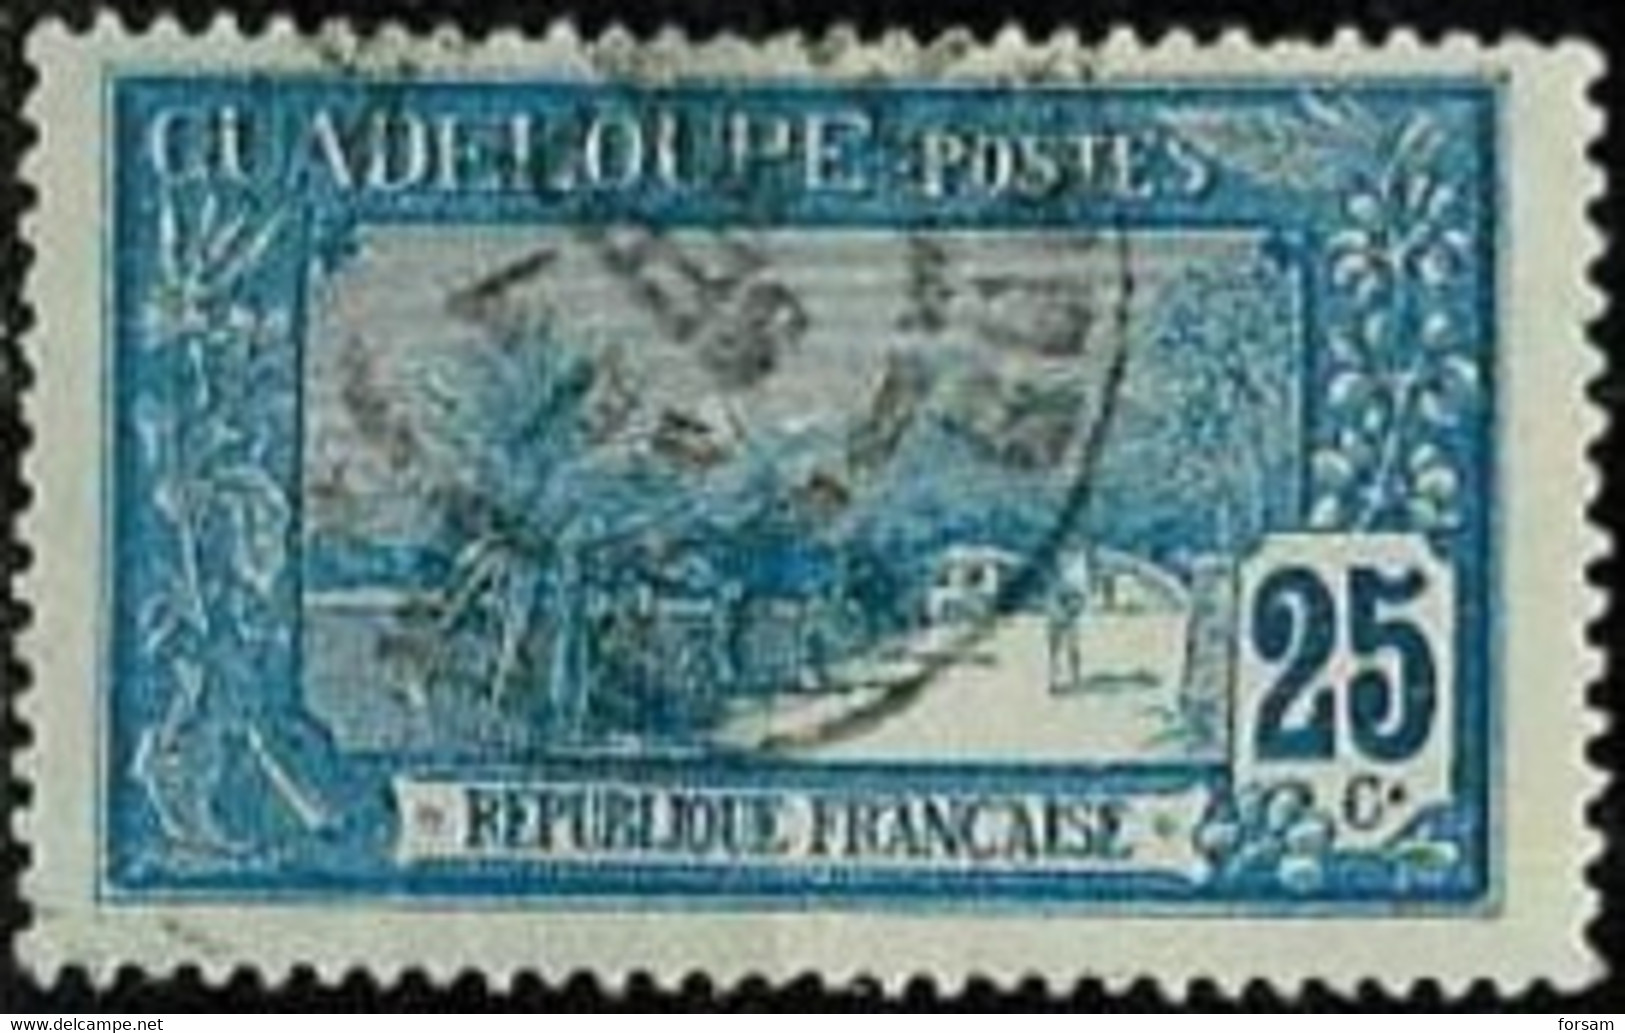 GUADELOUPE..1905..Michel # 59...used. - Used Stamps